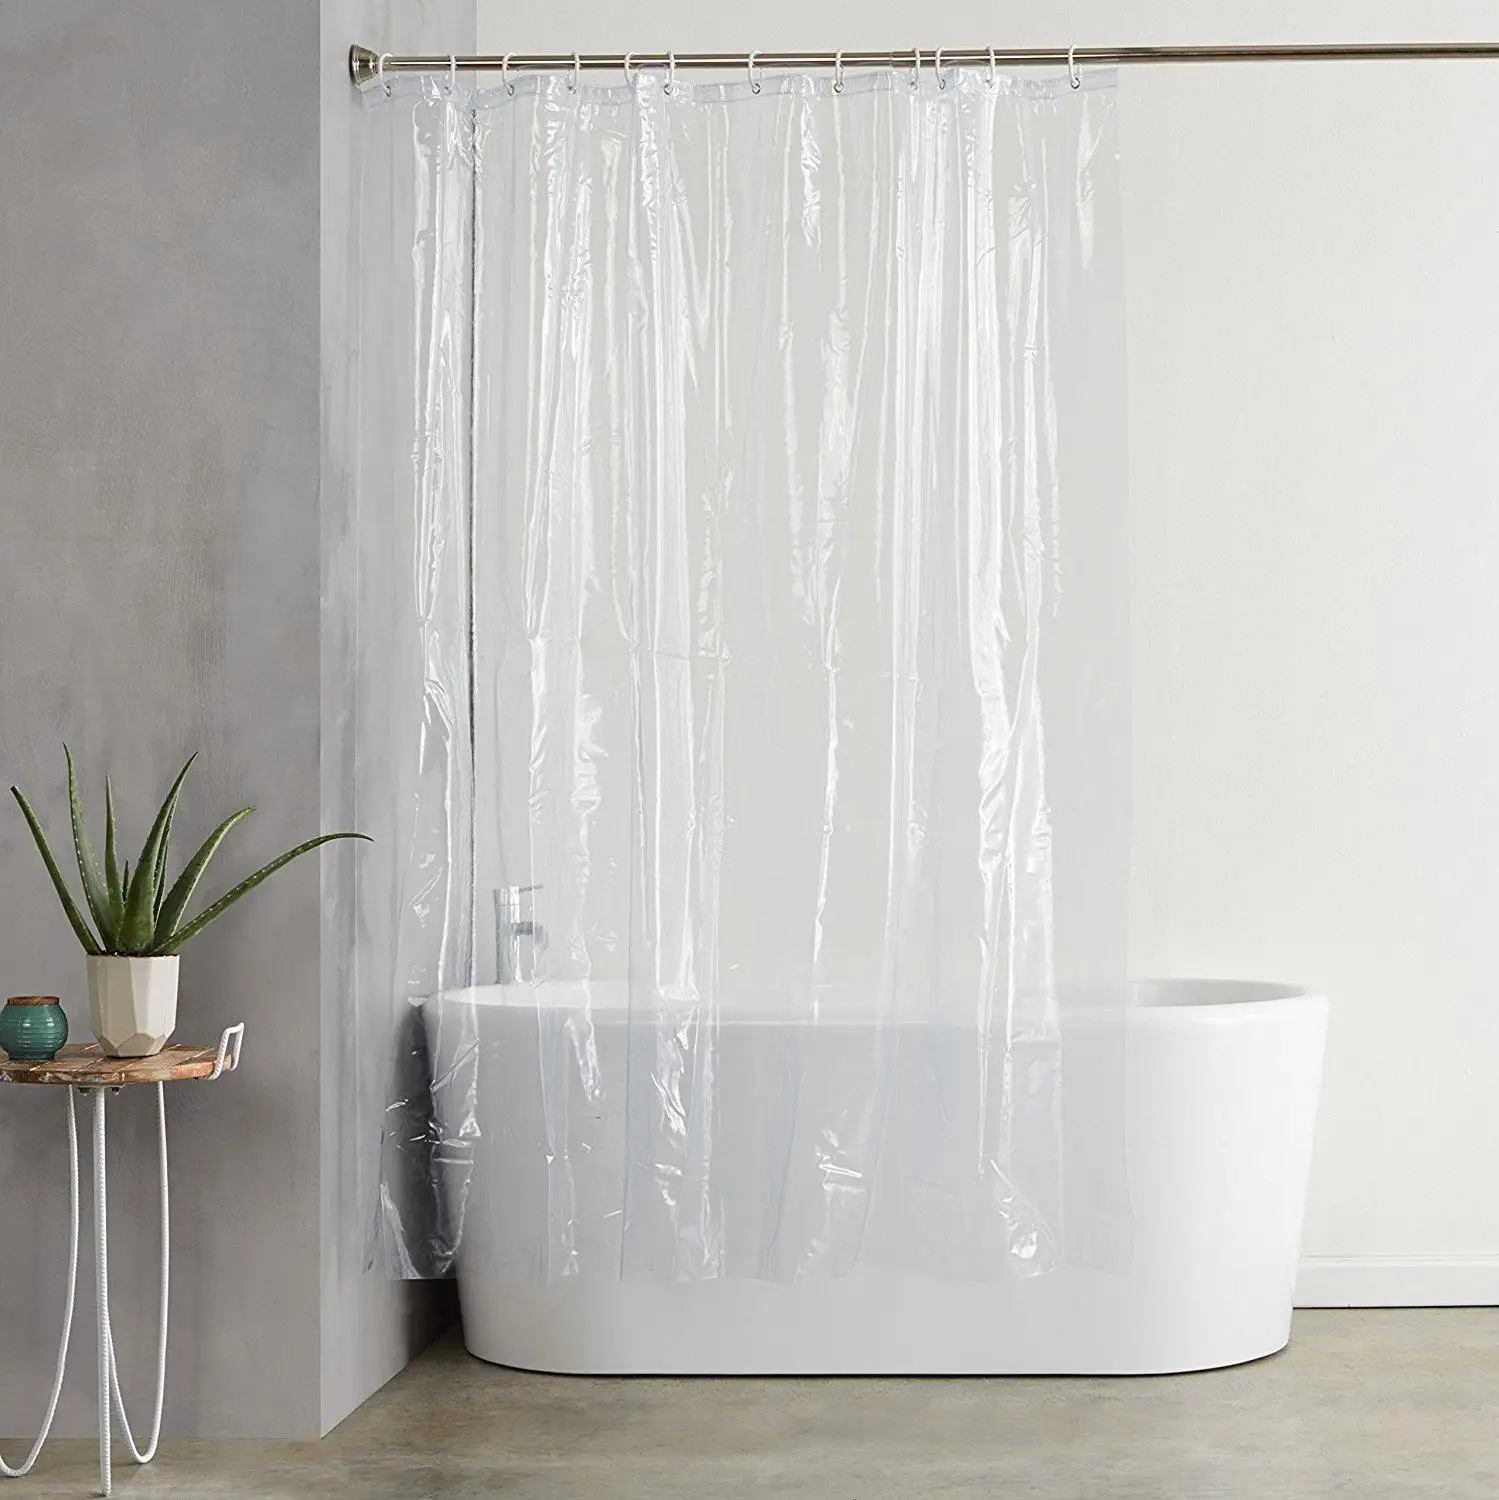 Waterproof Plastic PEVA Transparent Shower Curtain Liner Clear Bathroom Toilet Cover Mildew Proof Bath Curtains With 12 Hooks